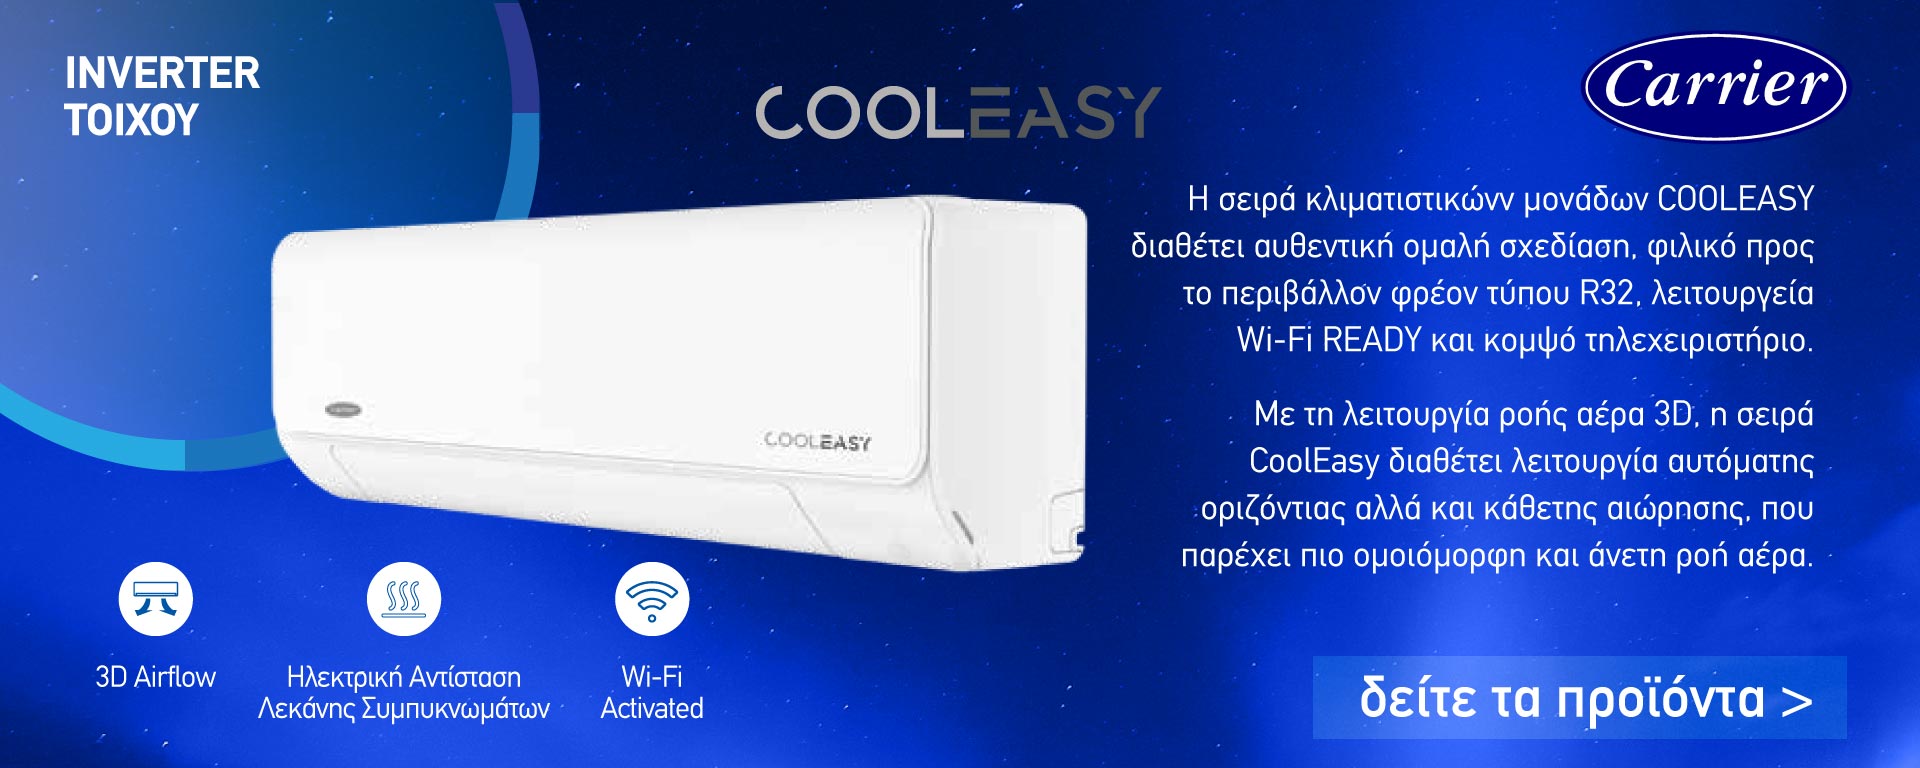 Voyias Clima - Carrier Cooleasy